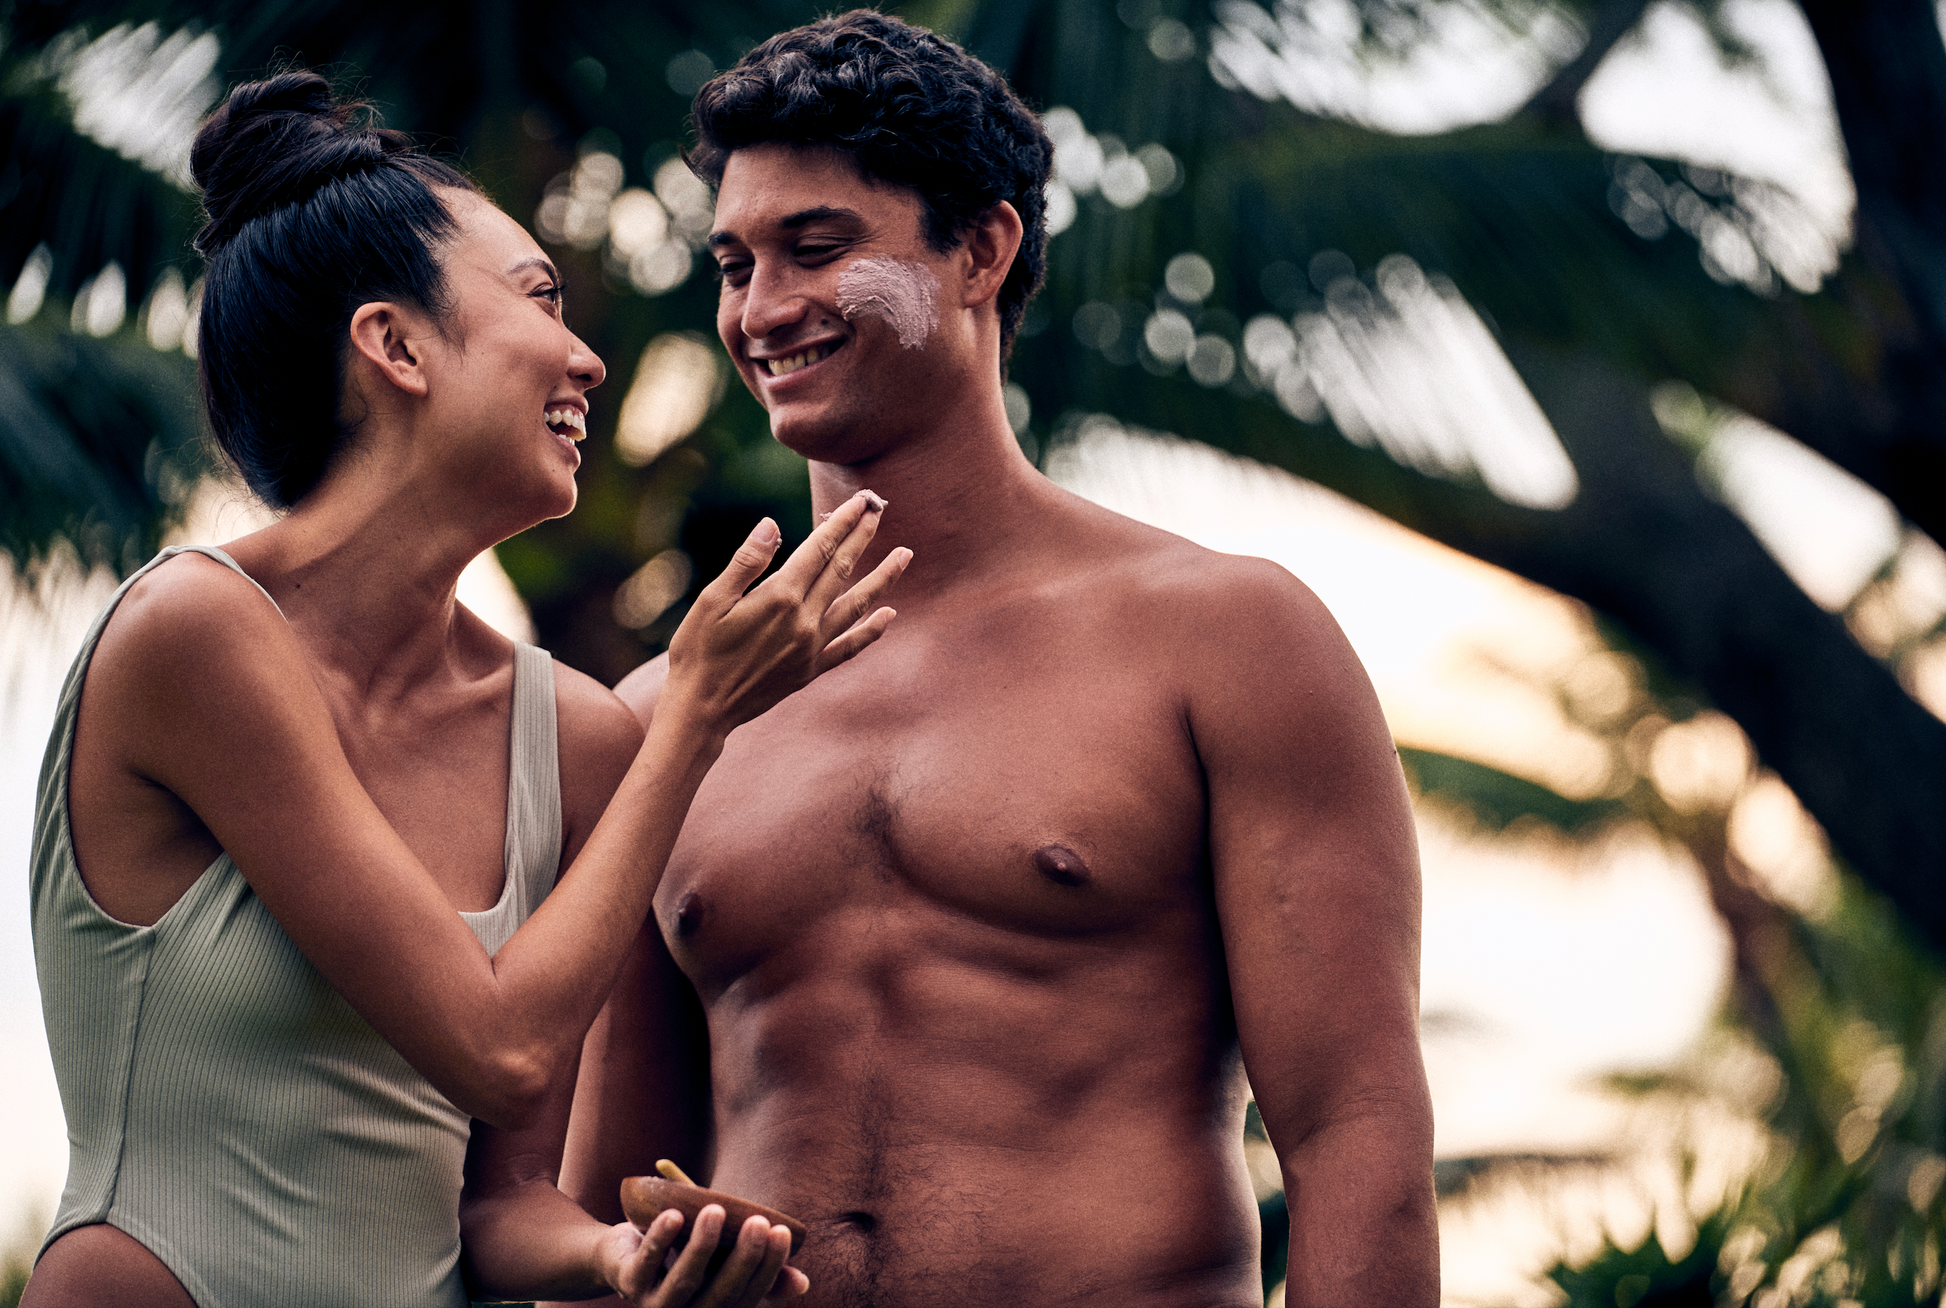 This image shows the Desesh US-made spa quality mineral face mask powder as an alternative to single use face mask sheets for a more environmentally friendly zero waste plastic free self care face mask routine. In the image a woman is applying the beetroot mineral face mask powder to a shirtless man